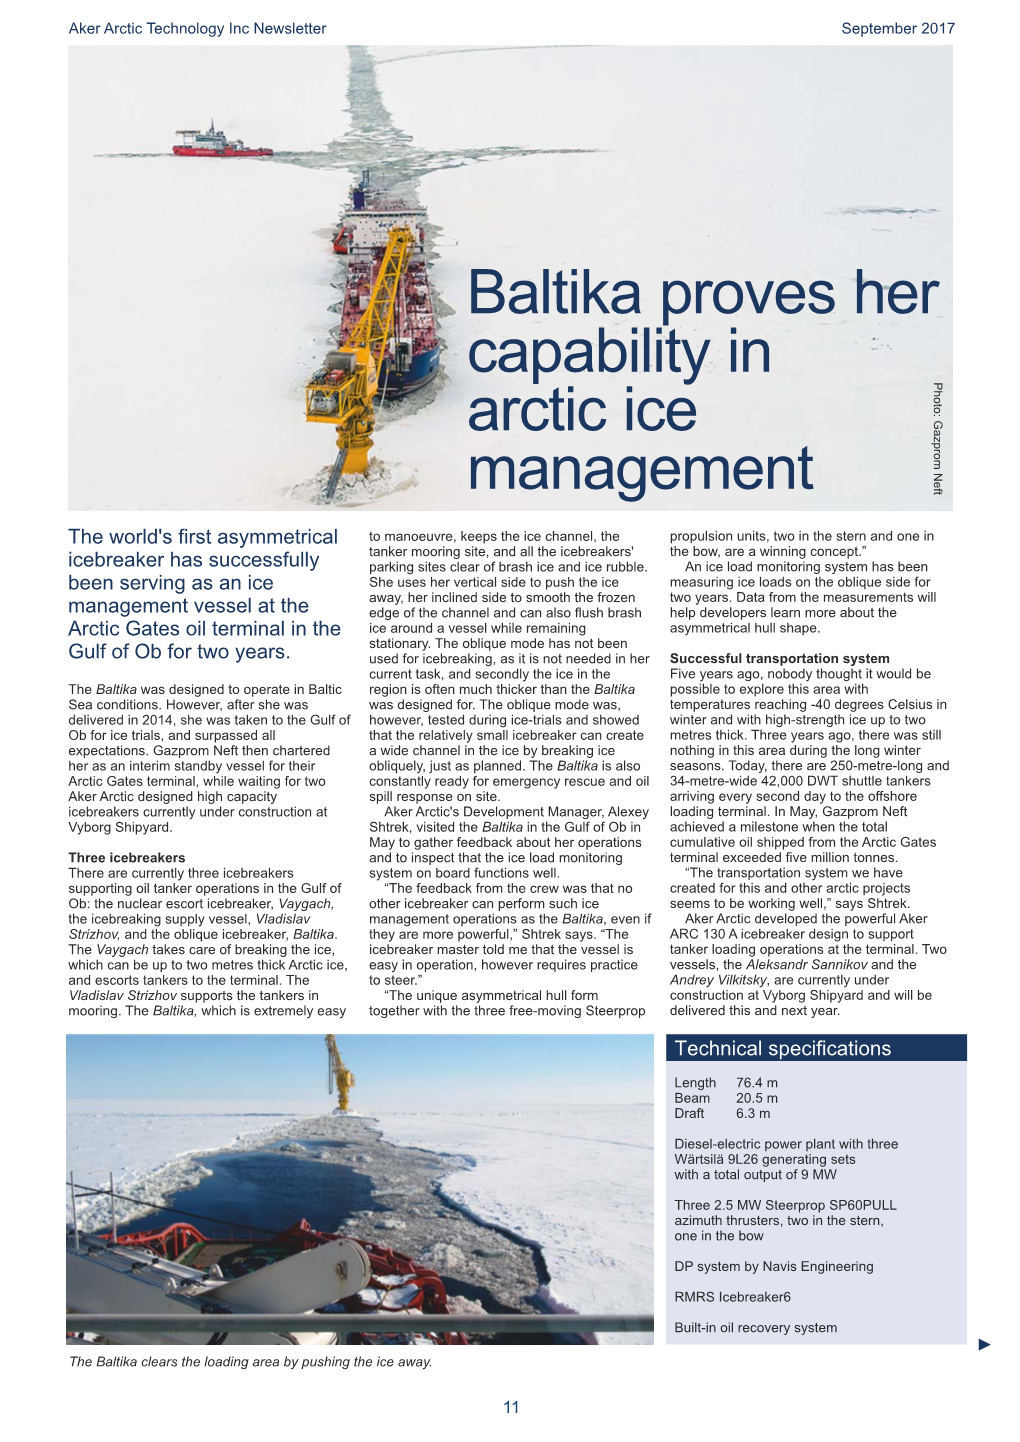 Baltika Proves Her Capability in Arctic Ice Management